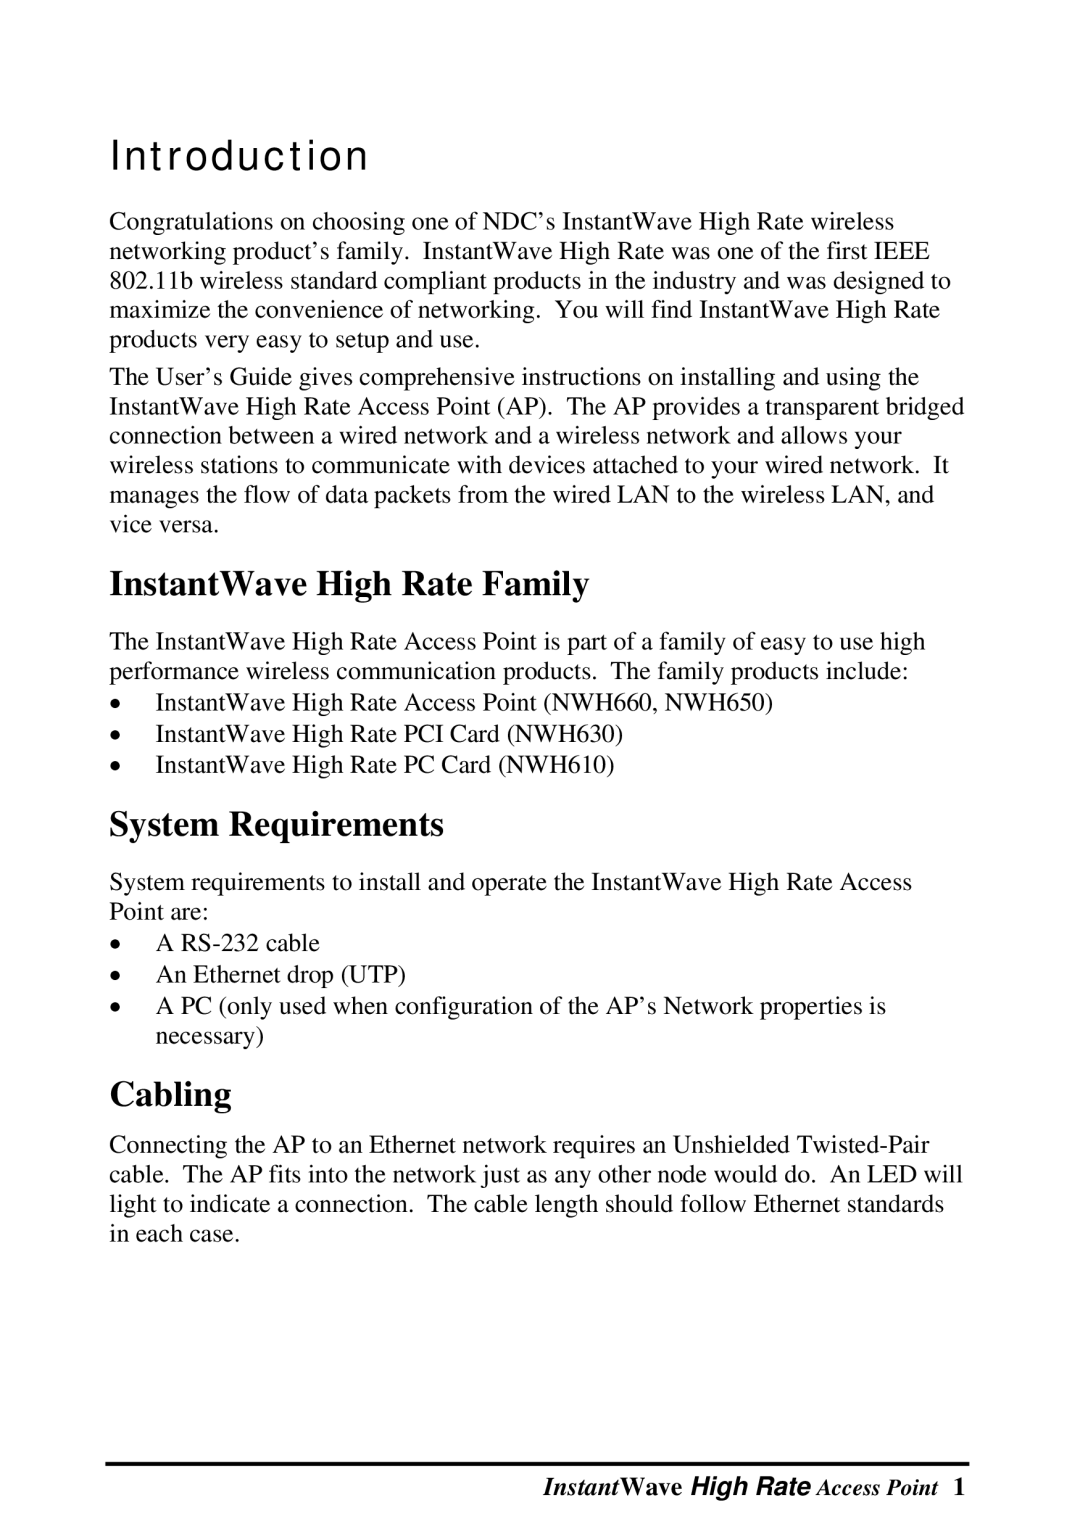 NDC comm Instant Wave manual Introduction, InstantWave High Rate Family, System Requirements, Cabling 